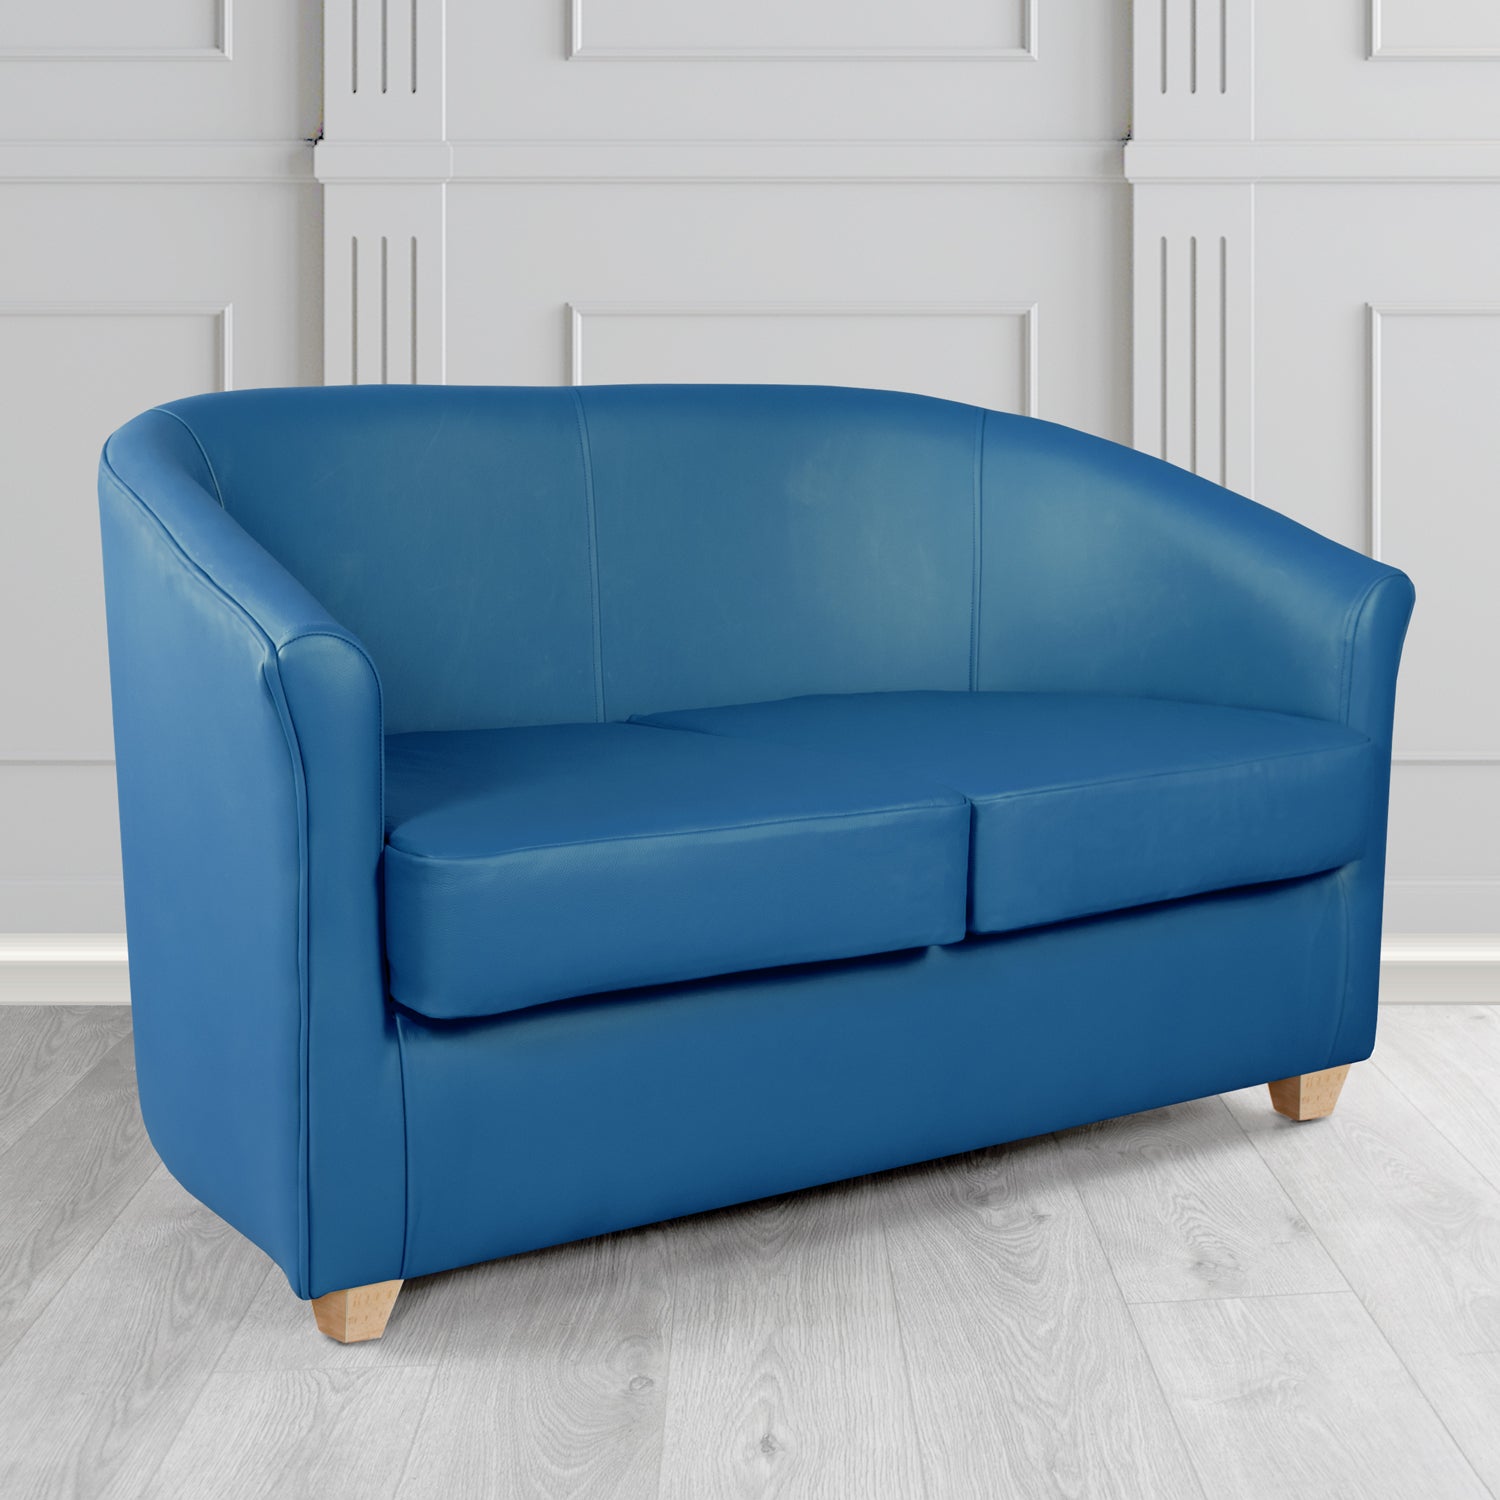 Cannes 2 Seater Tub Sofa in Madrid Royal Faux Leather - The Tub Chair Shop